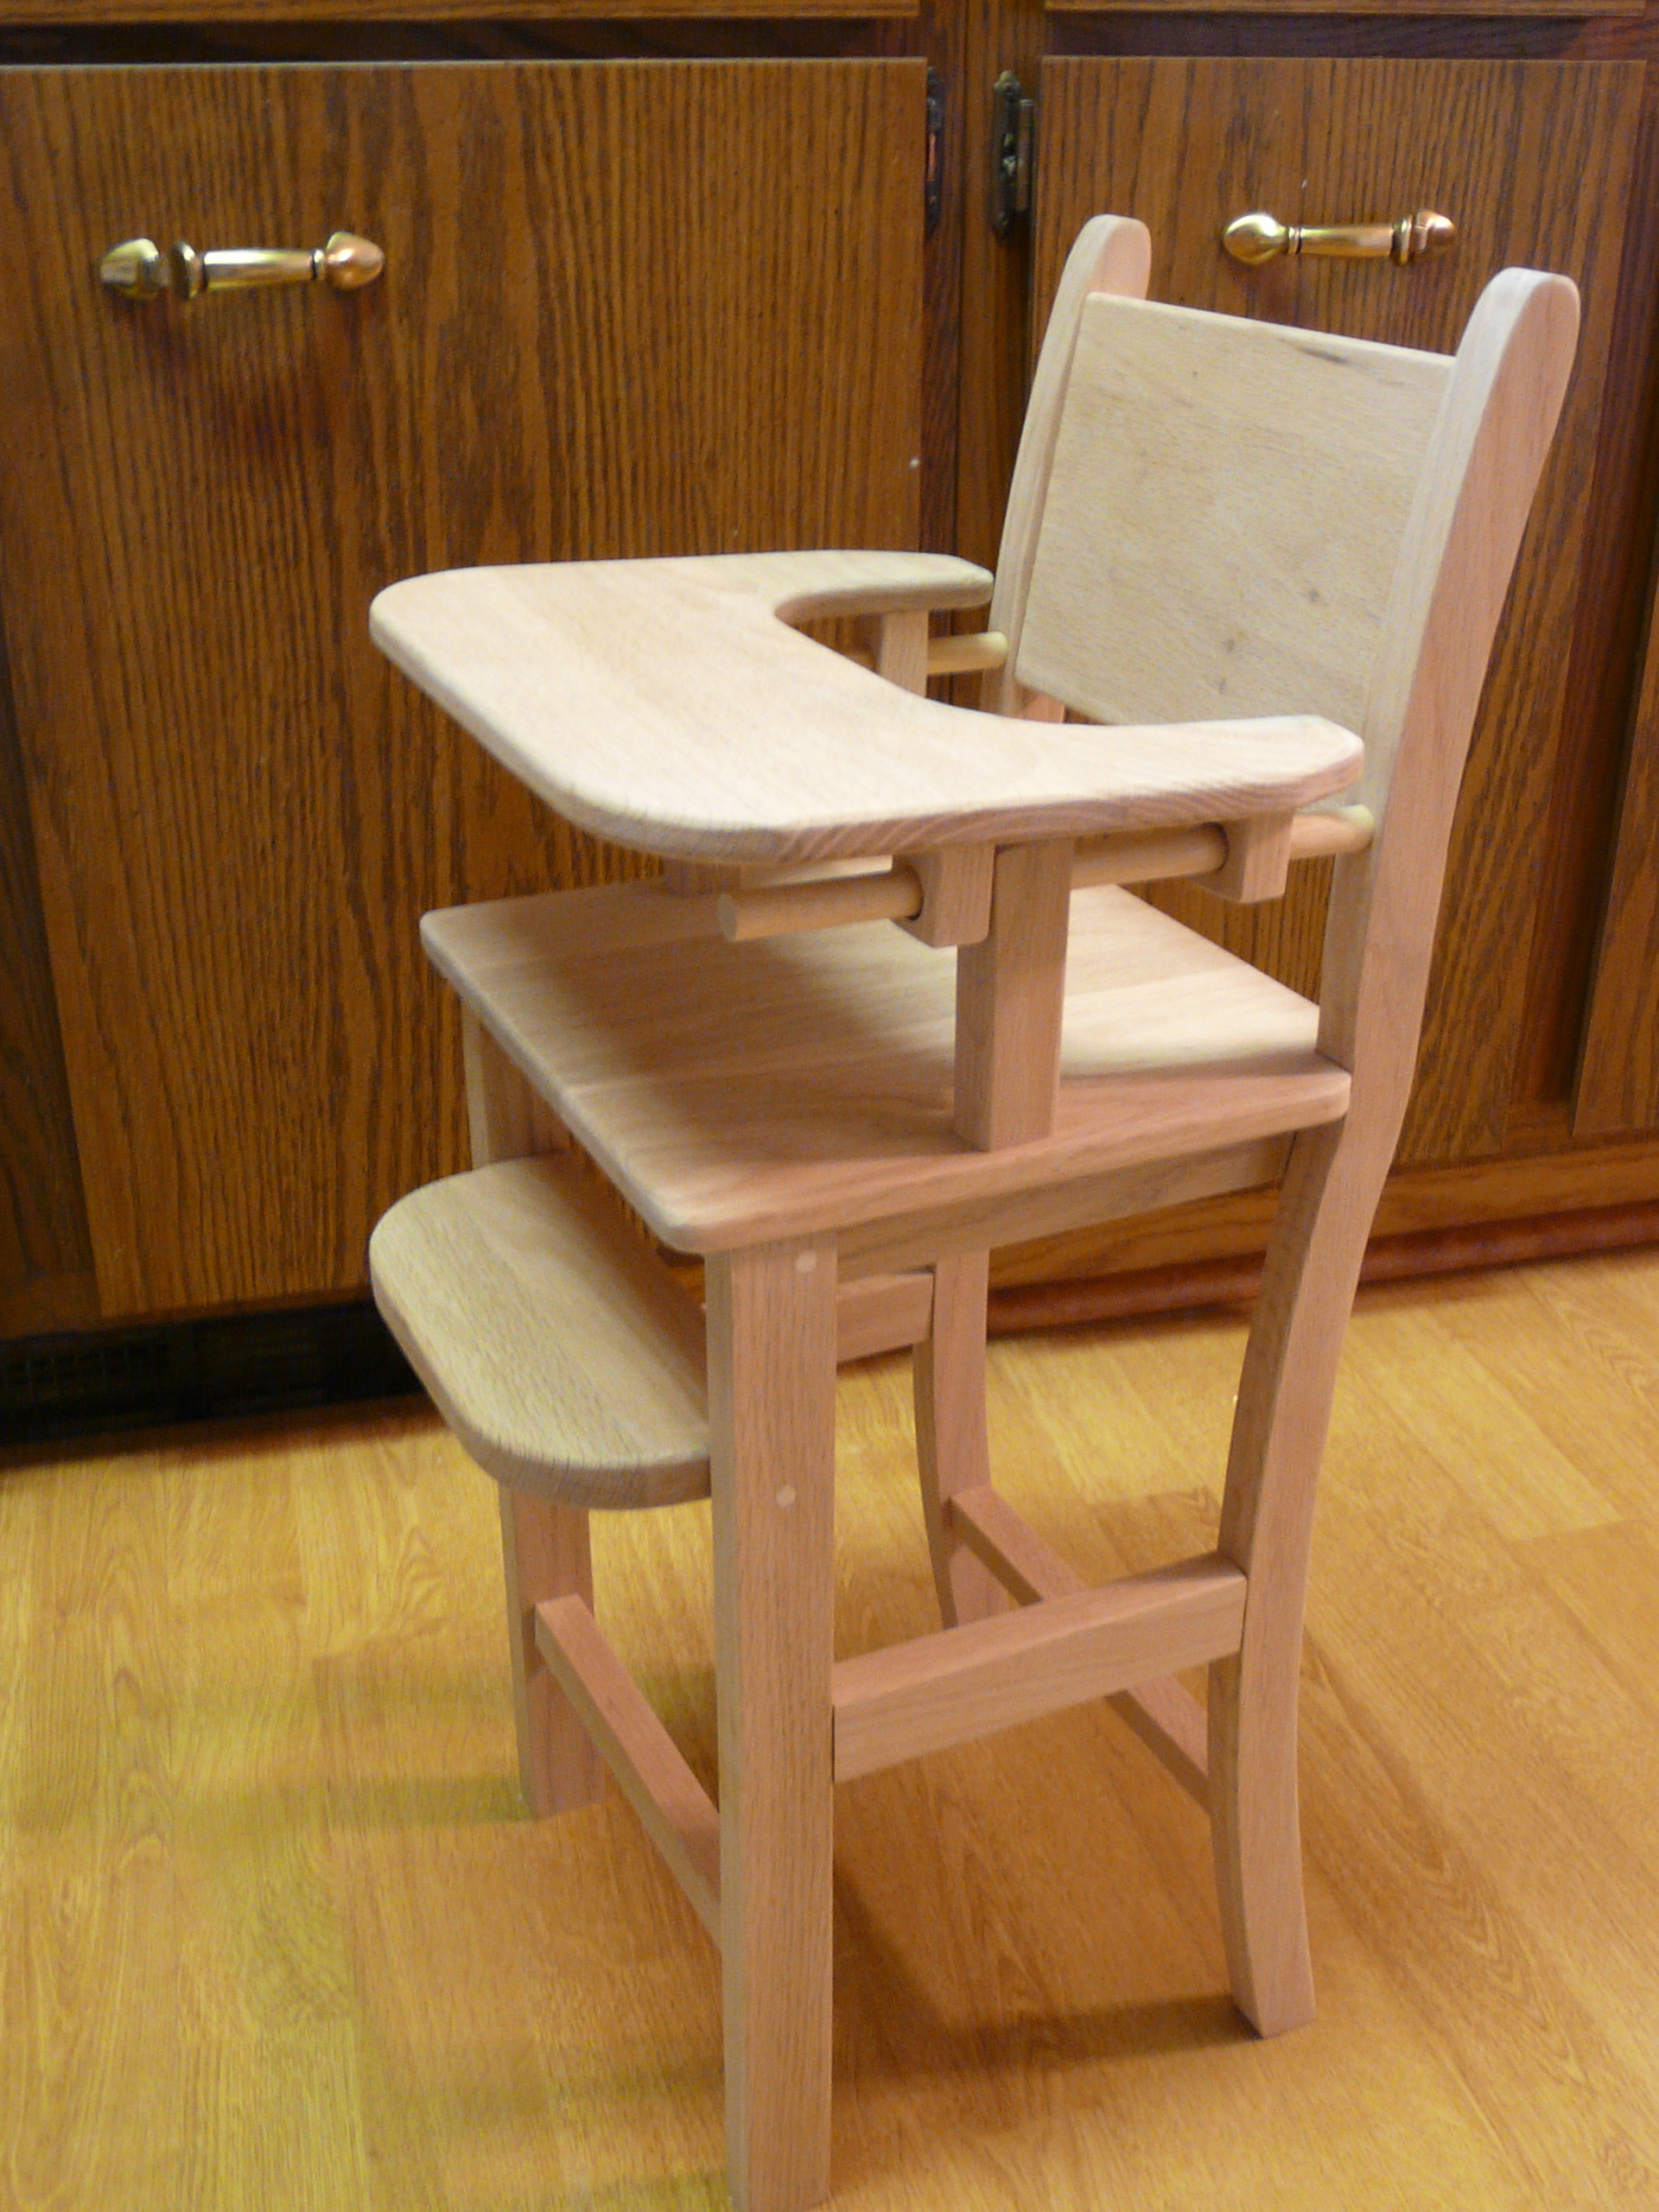 Wood Projects: doll high chair &amp; Welcome sign « Thoughts ...